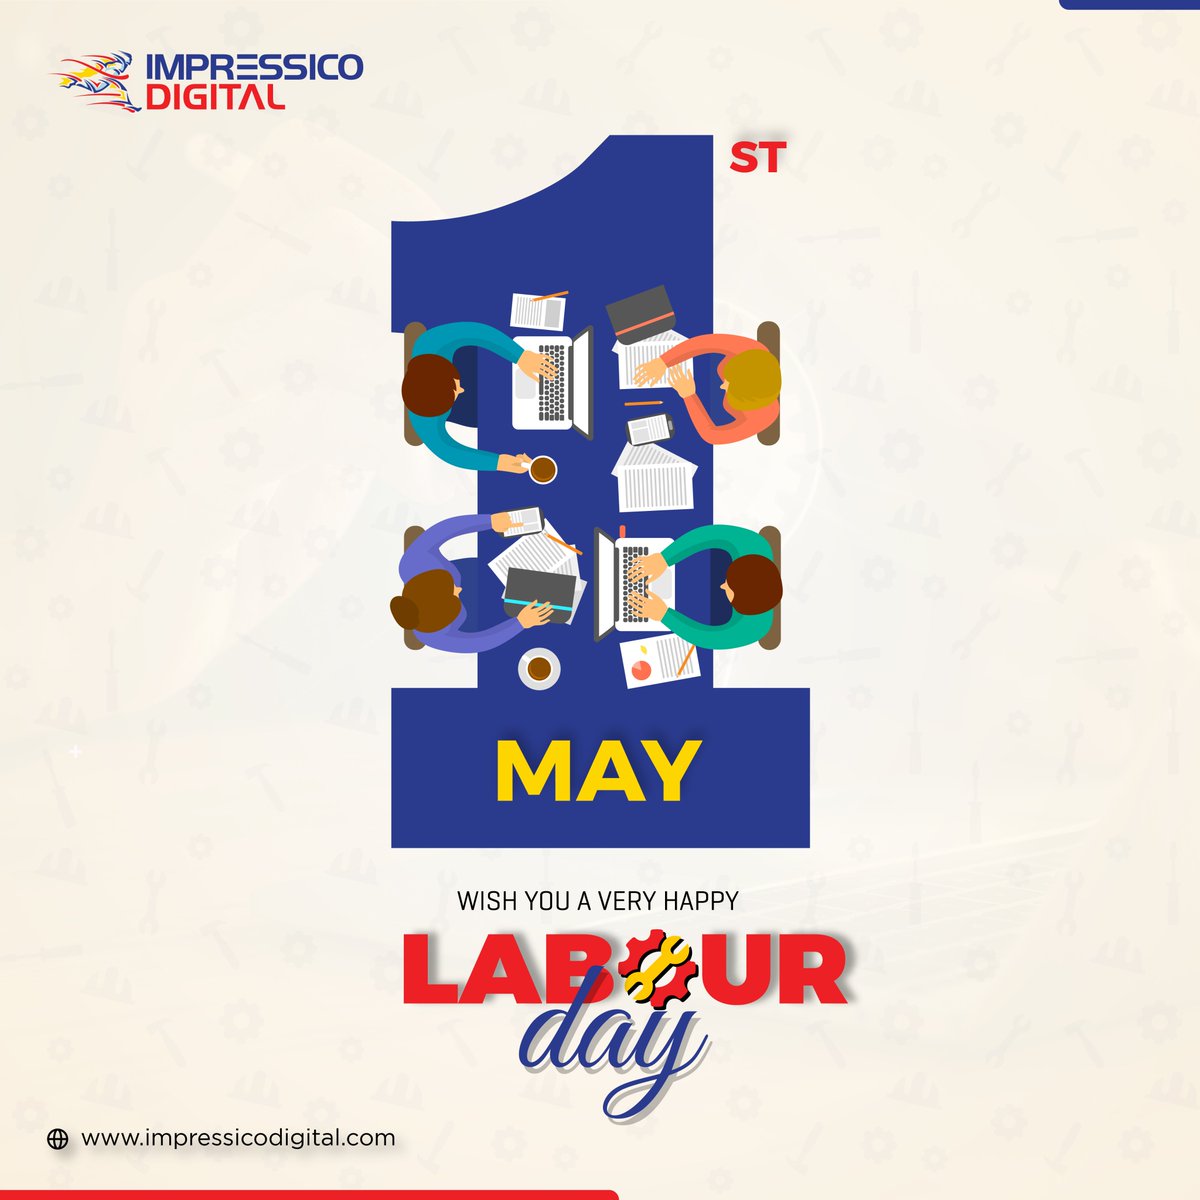 Today, we salute the digital heroes at Impressico!  Your tireless efforts keep our clicks humming and our online presence booming.

Here's to a well-deserved day of rest and recharge!

Happy Labour Day

#ImpressicoDigital #DigitalWorkforce #AppreciationPost #DigitalMarketing